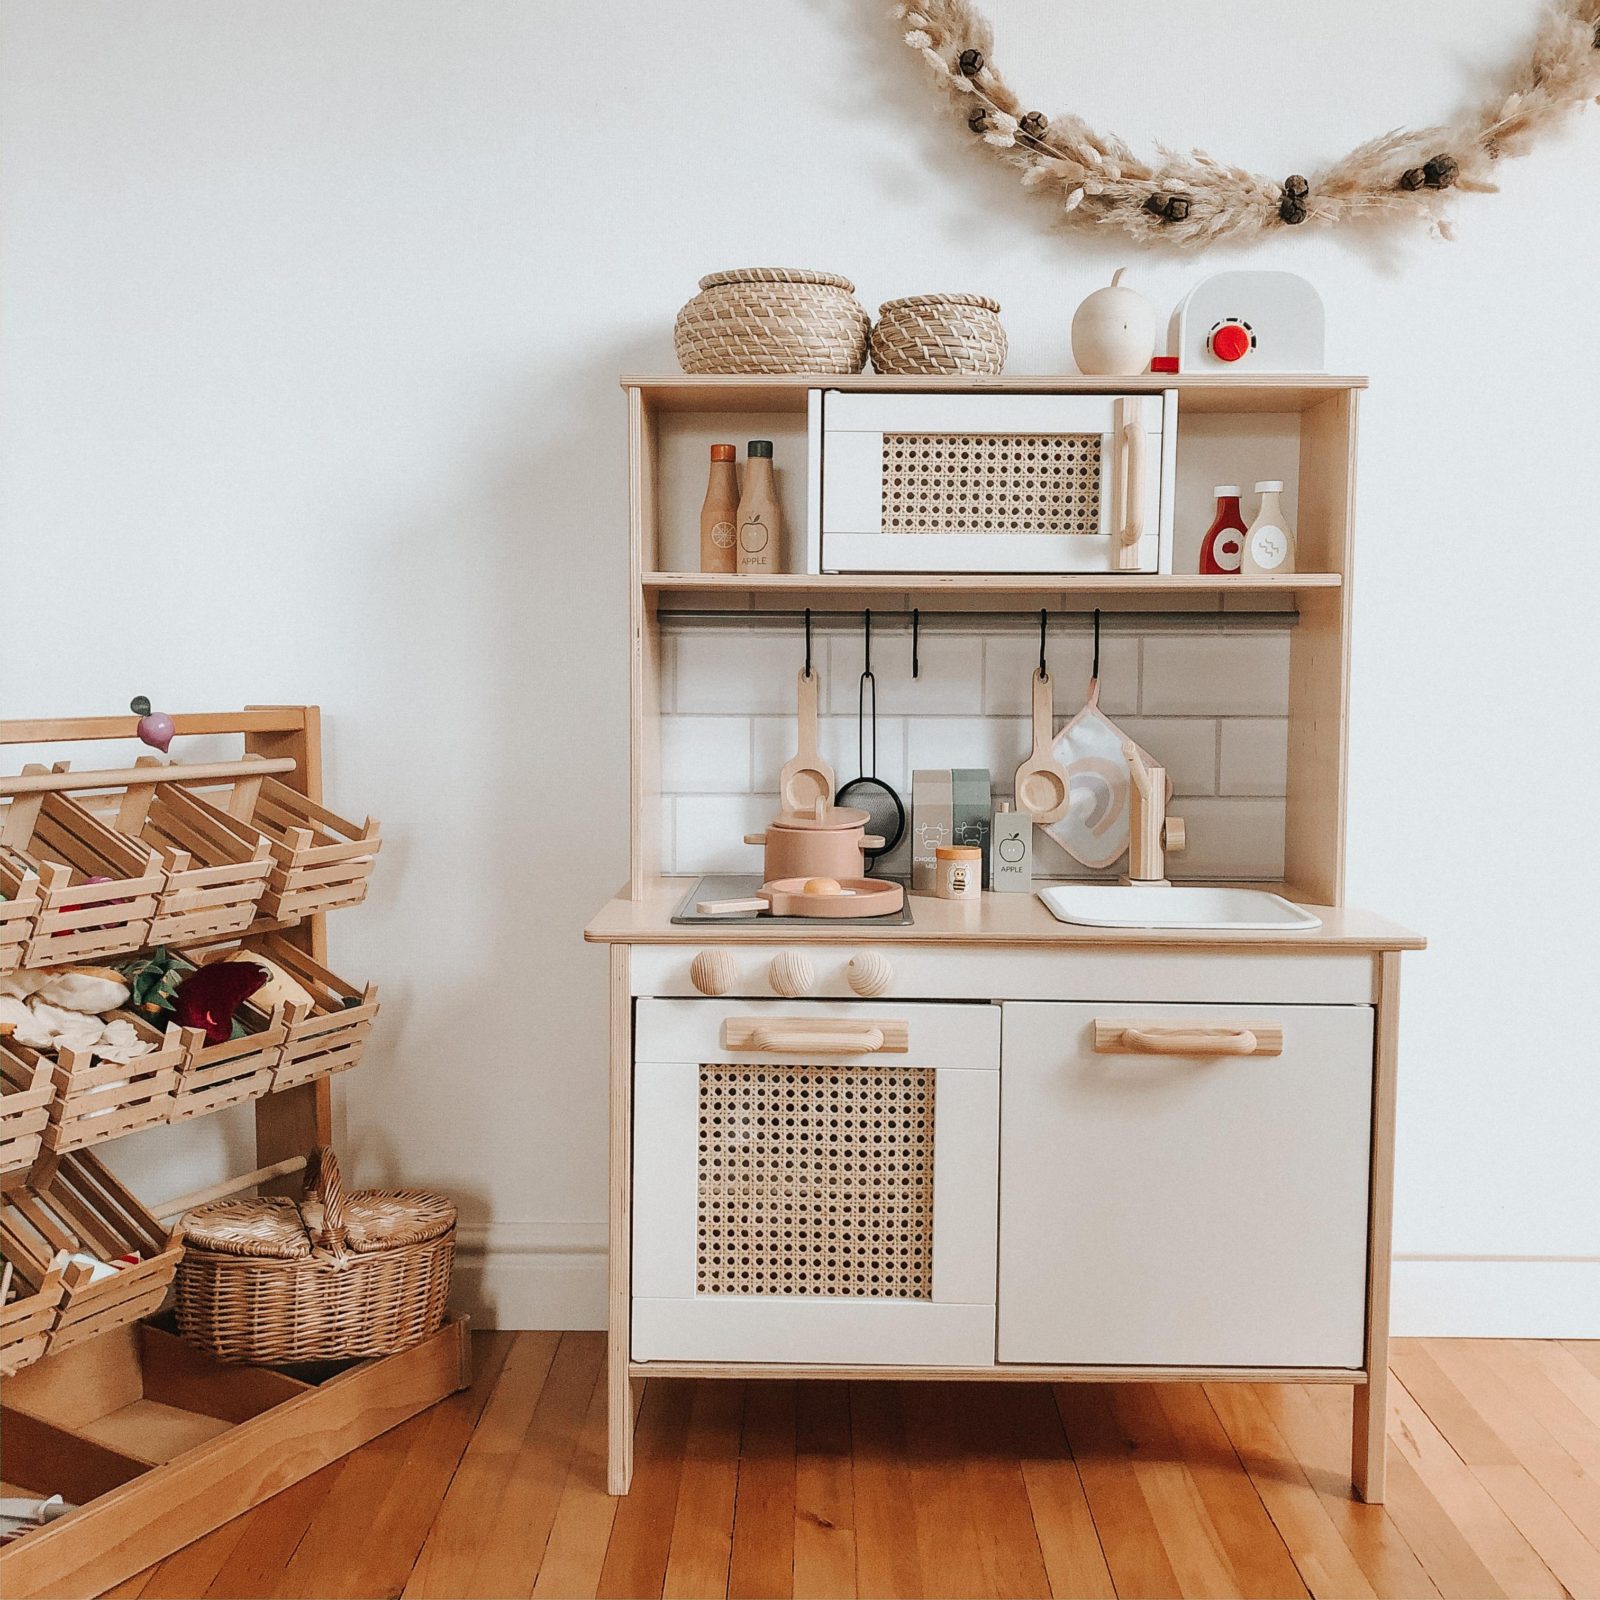 ikea kitchen set with wooden and boho accents